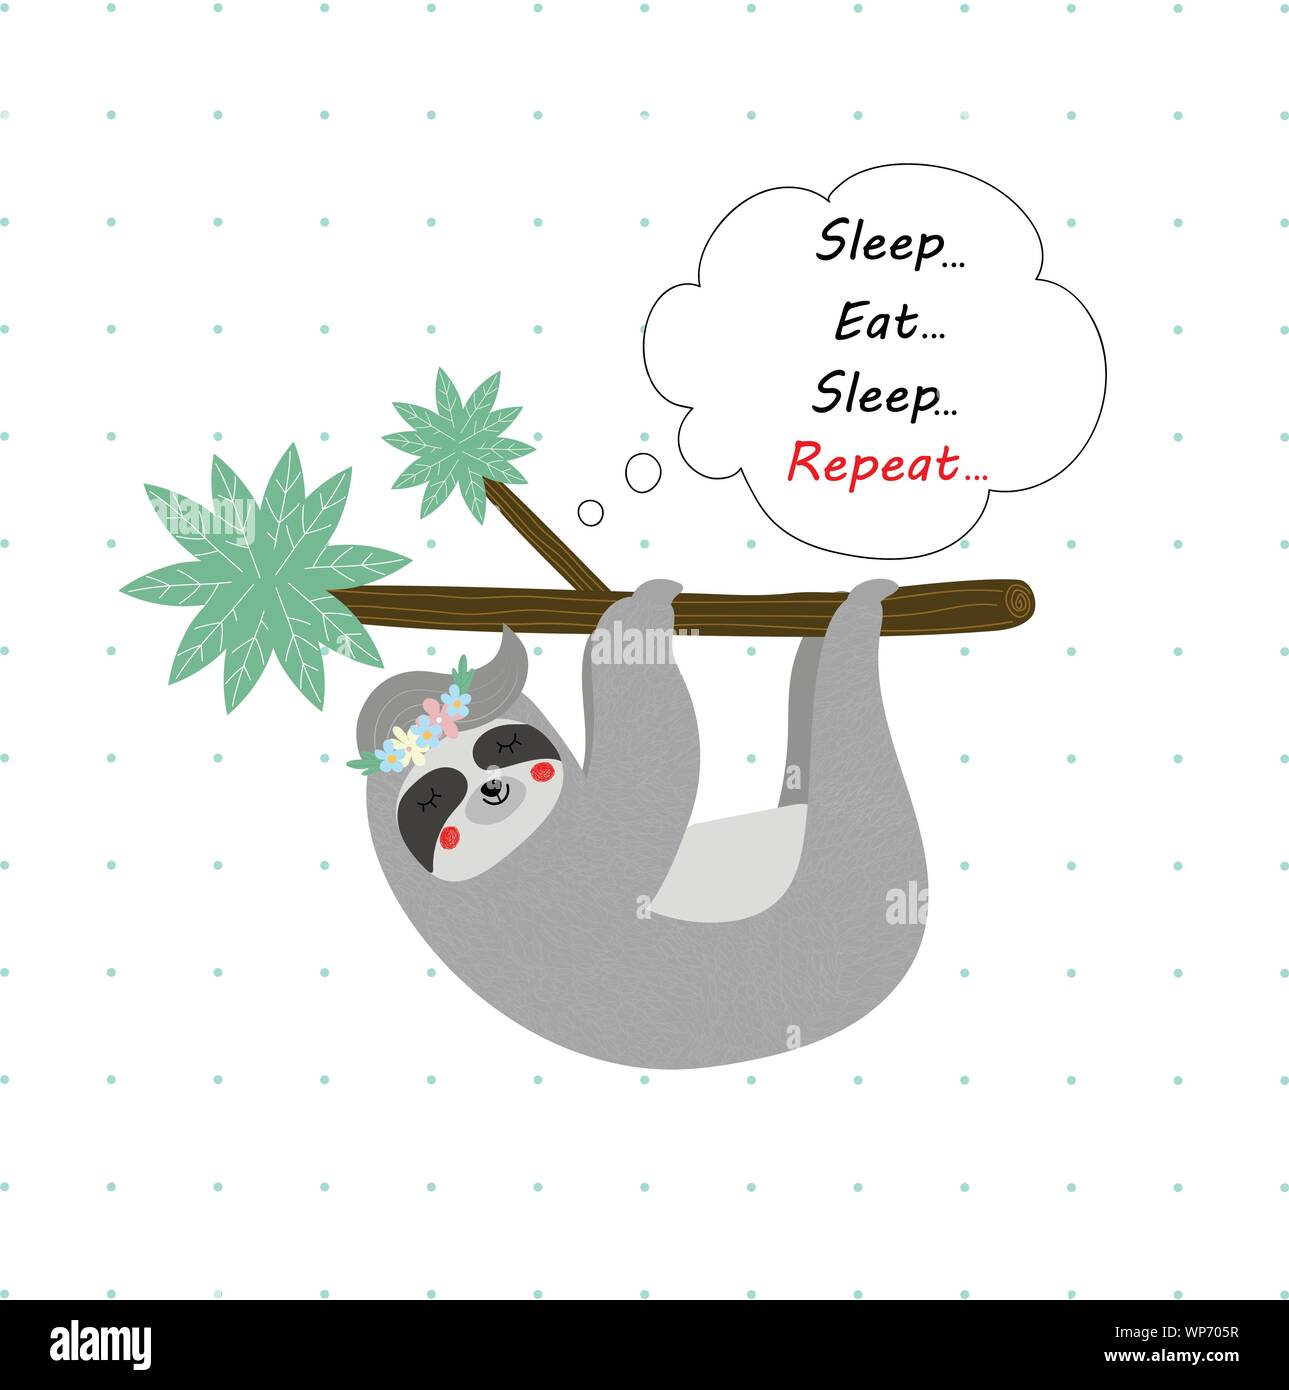 Cute funny sloth in flower wreath sleep hanging on tree branch on white polka dots pattern. Sleep eat repeat motto in speech bubble Tshirt design prin Stock Vector